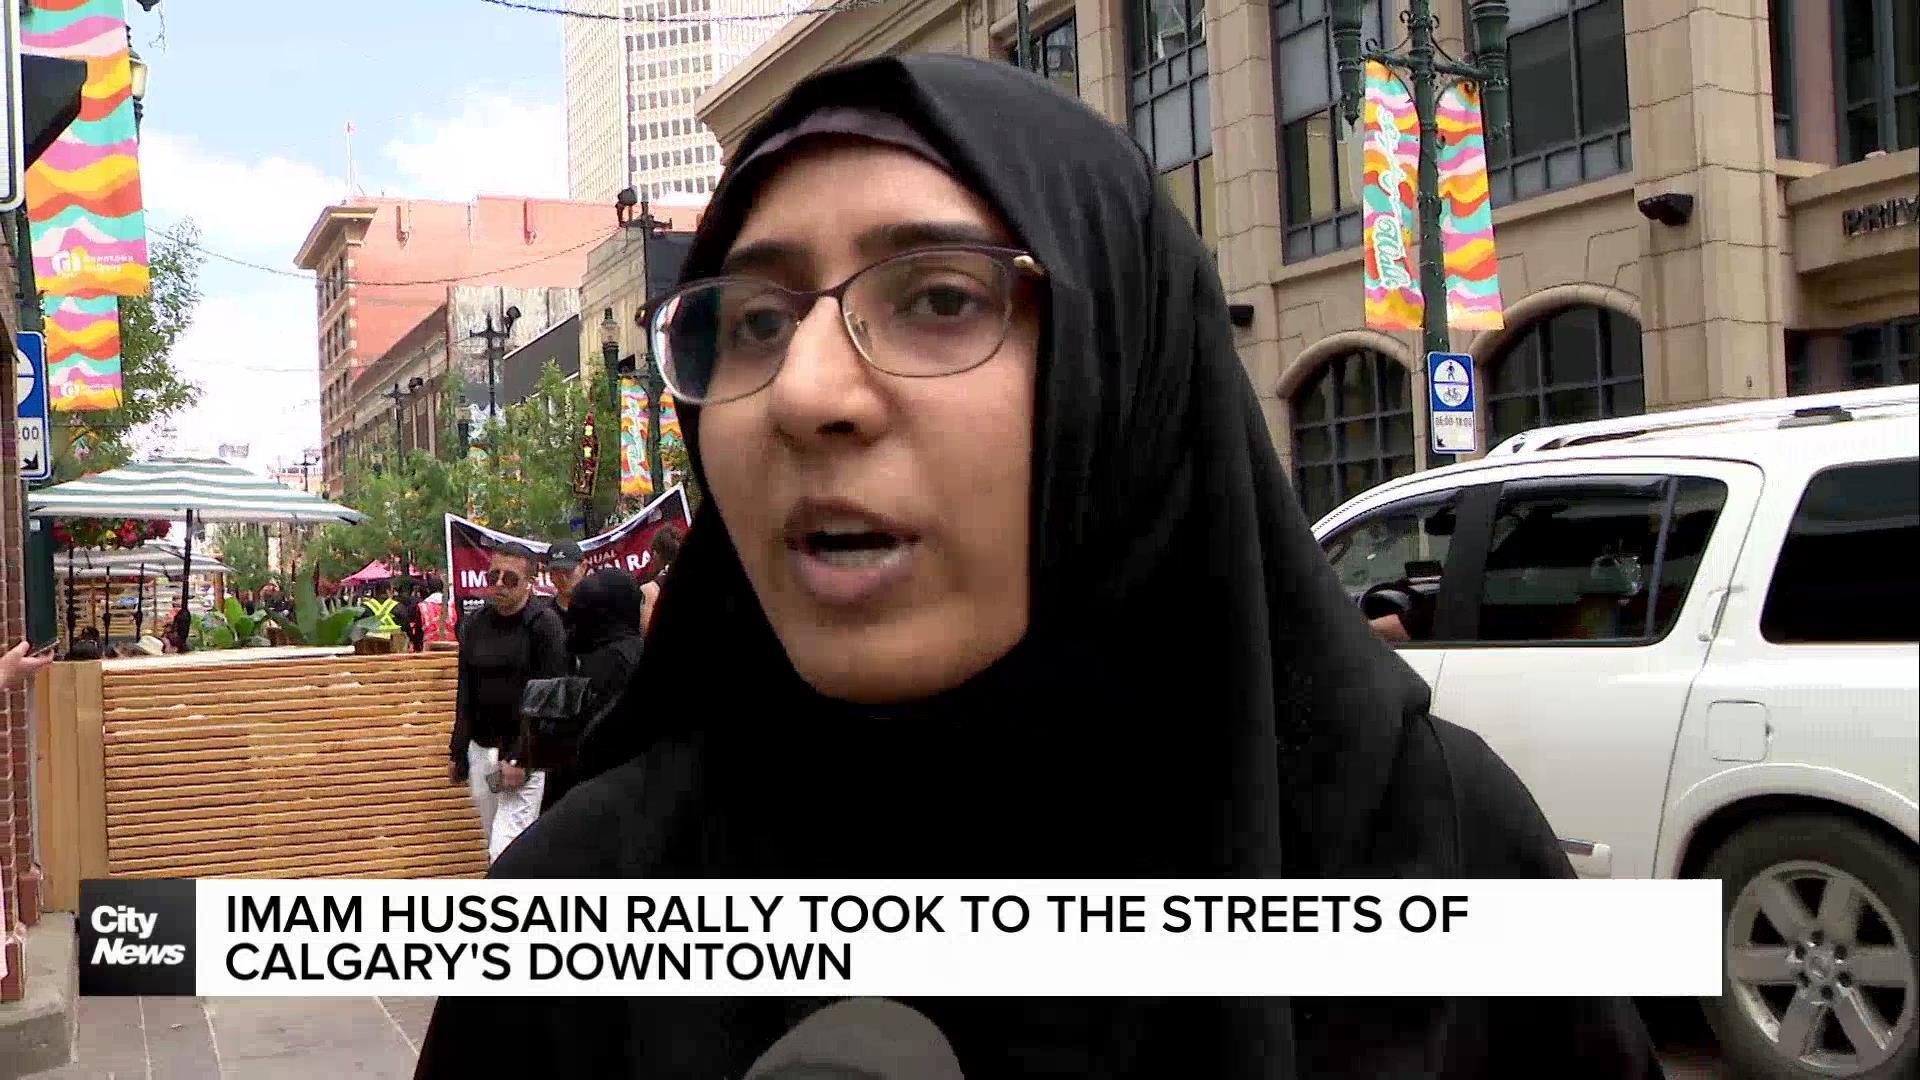 Imam Hussain Rally took to the streets of Calgary's Downtown